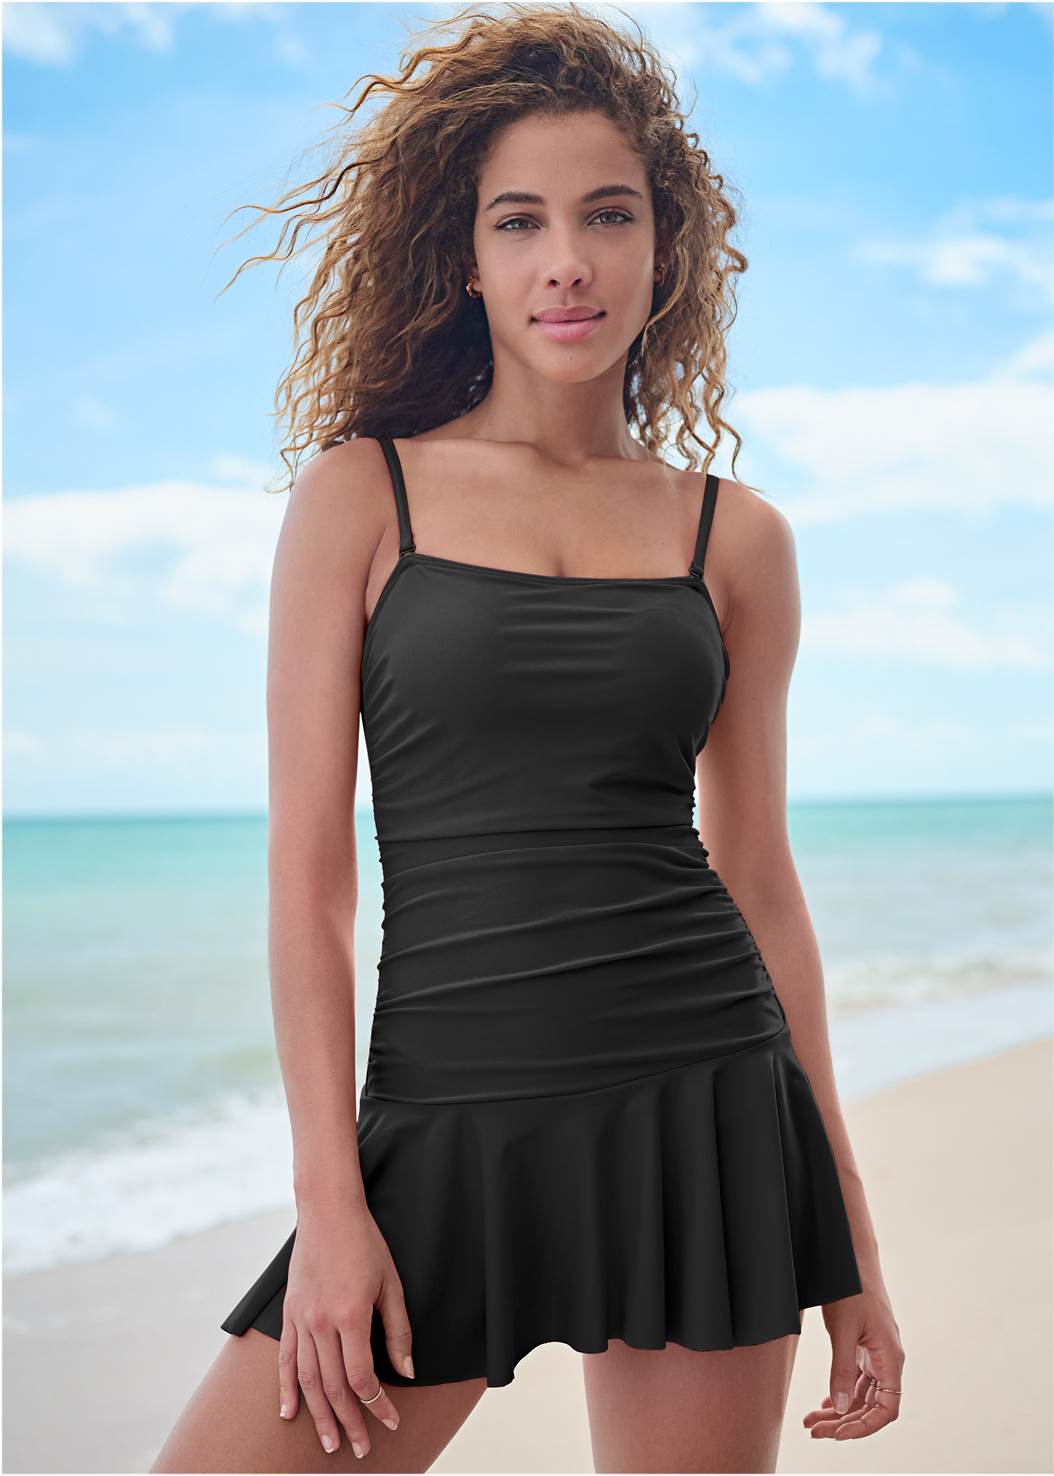 Skirted Bandeau One-Piece Swimsuit in Black Beauty